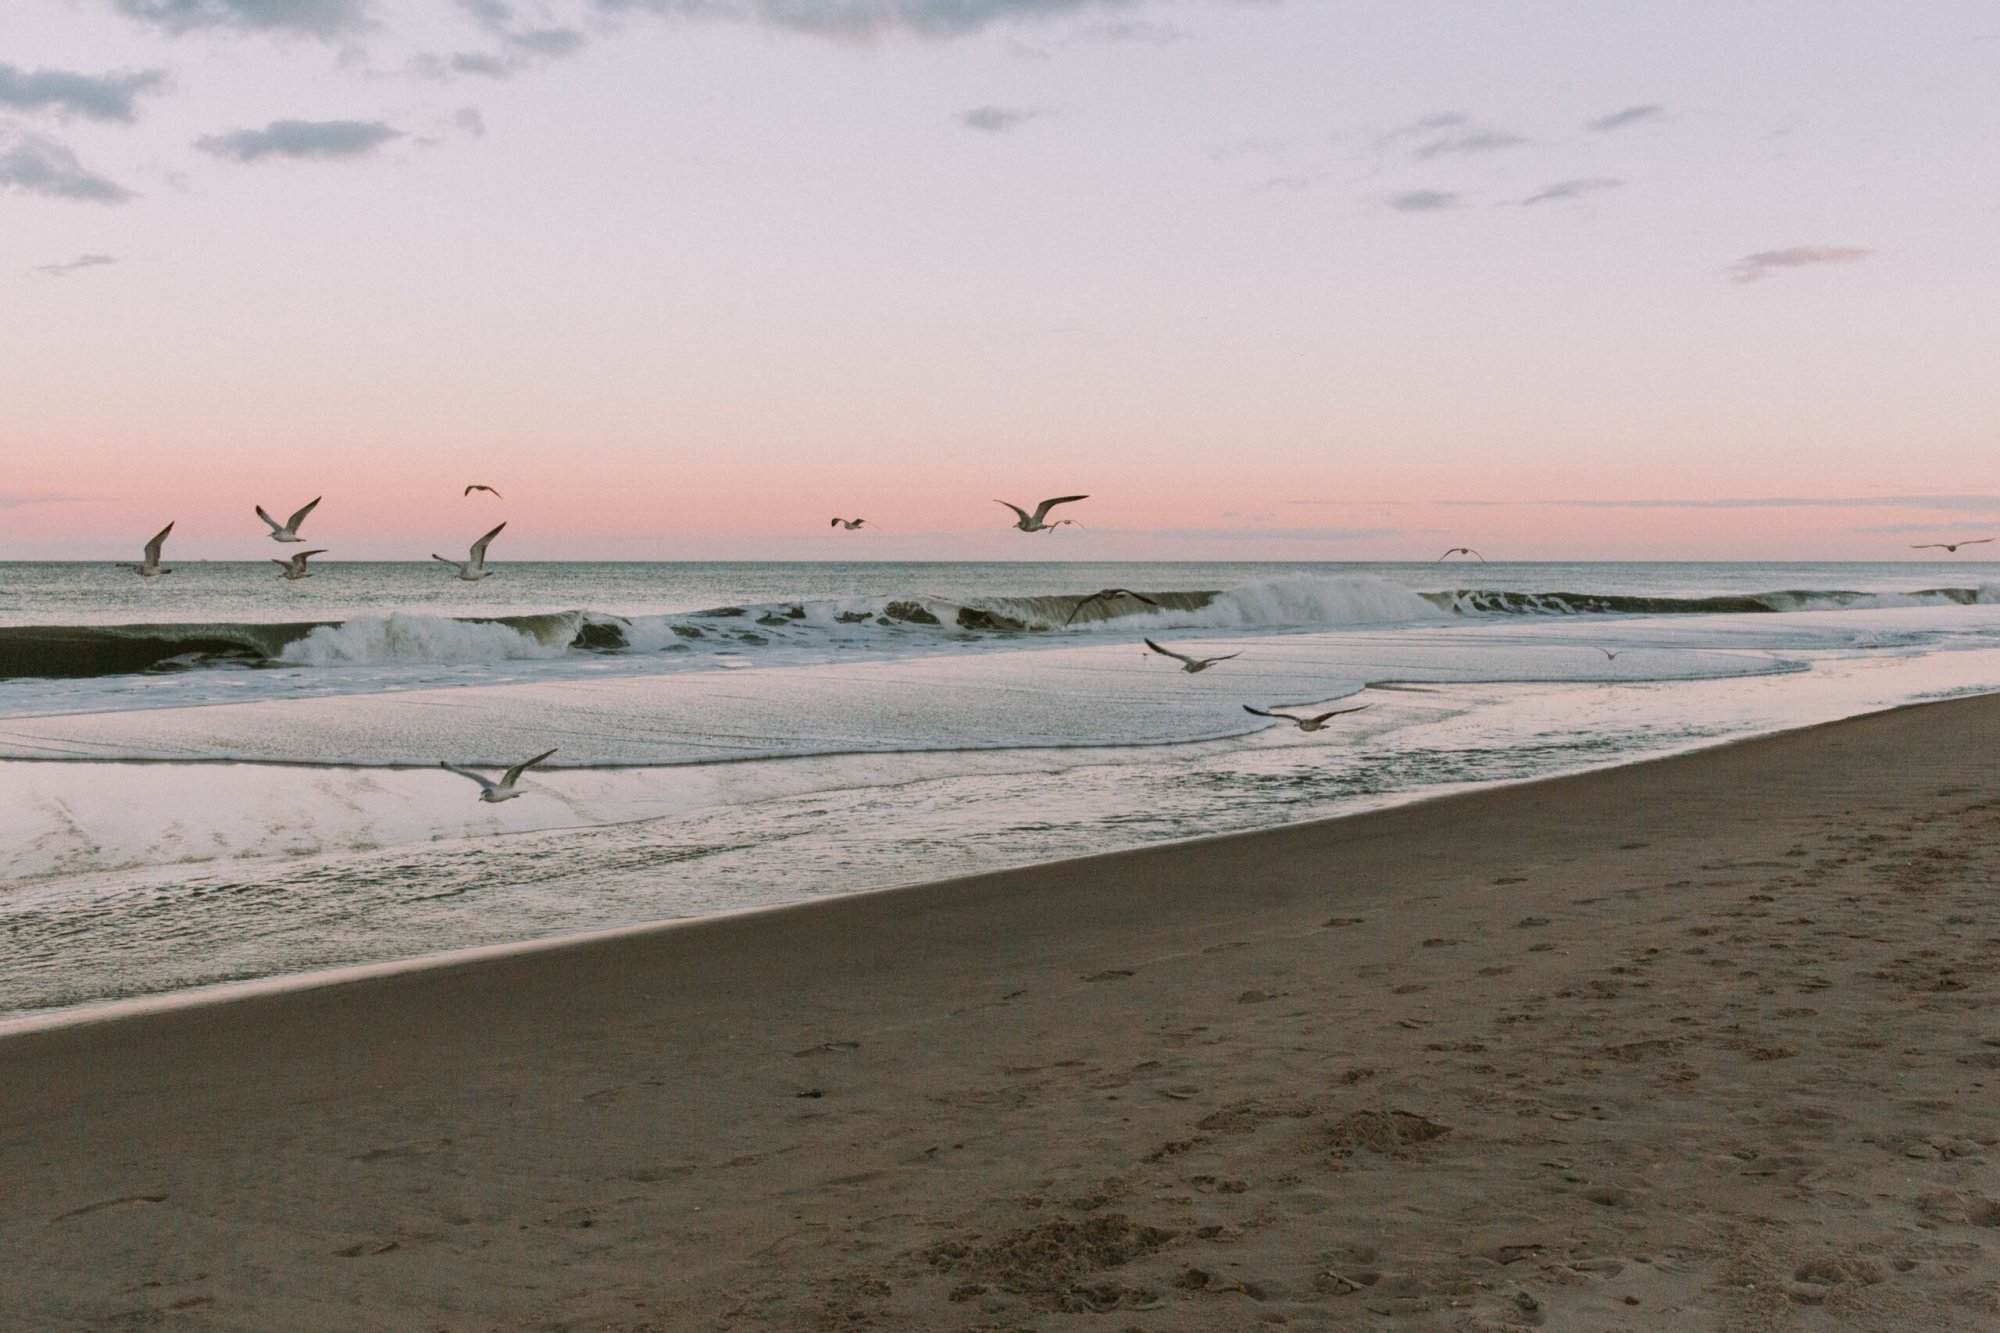 A group of seagulls flying over a beach at sunset.